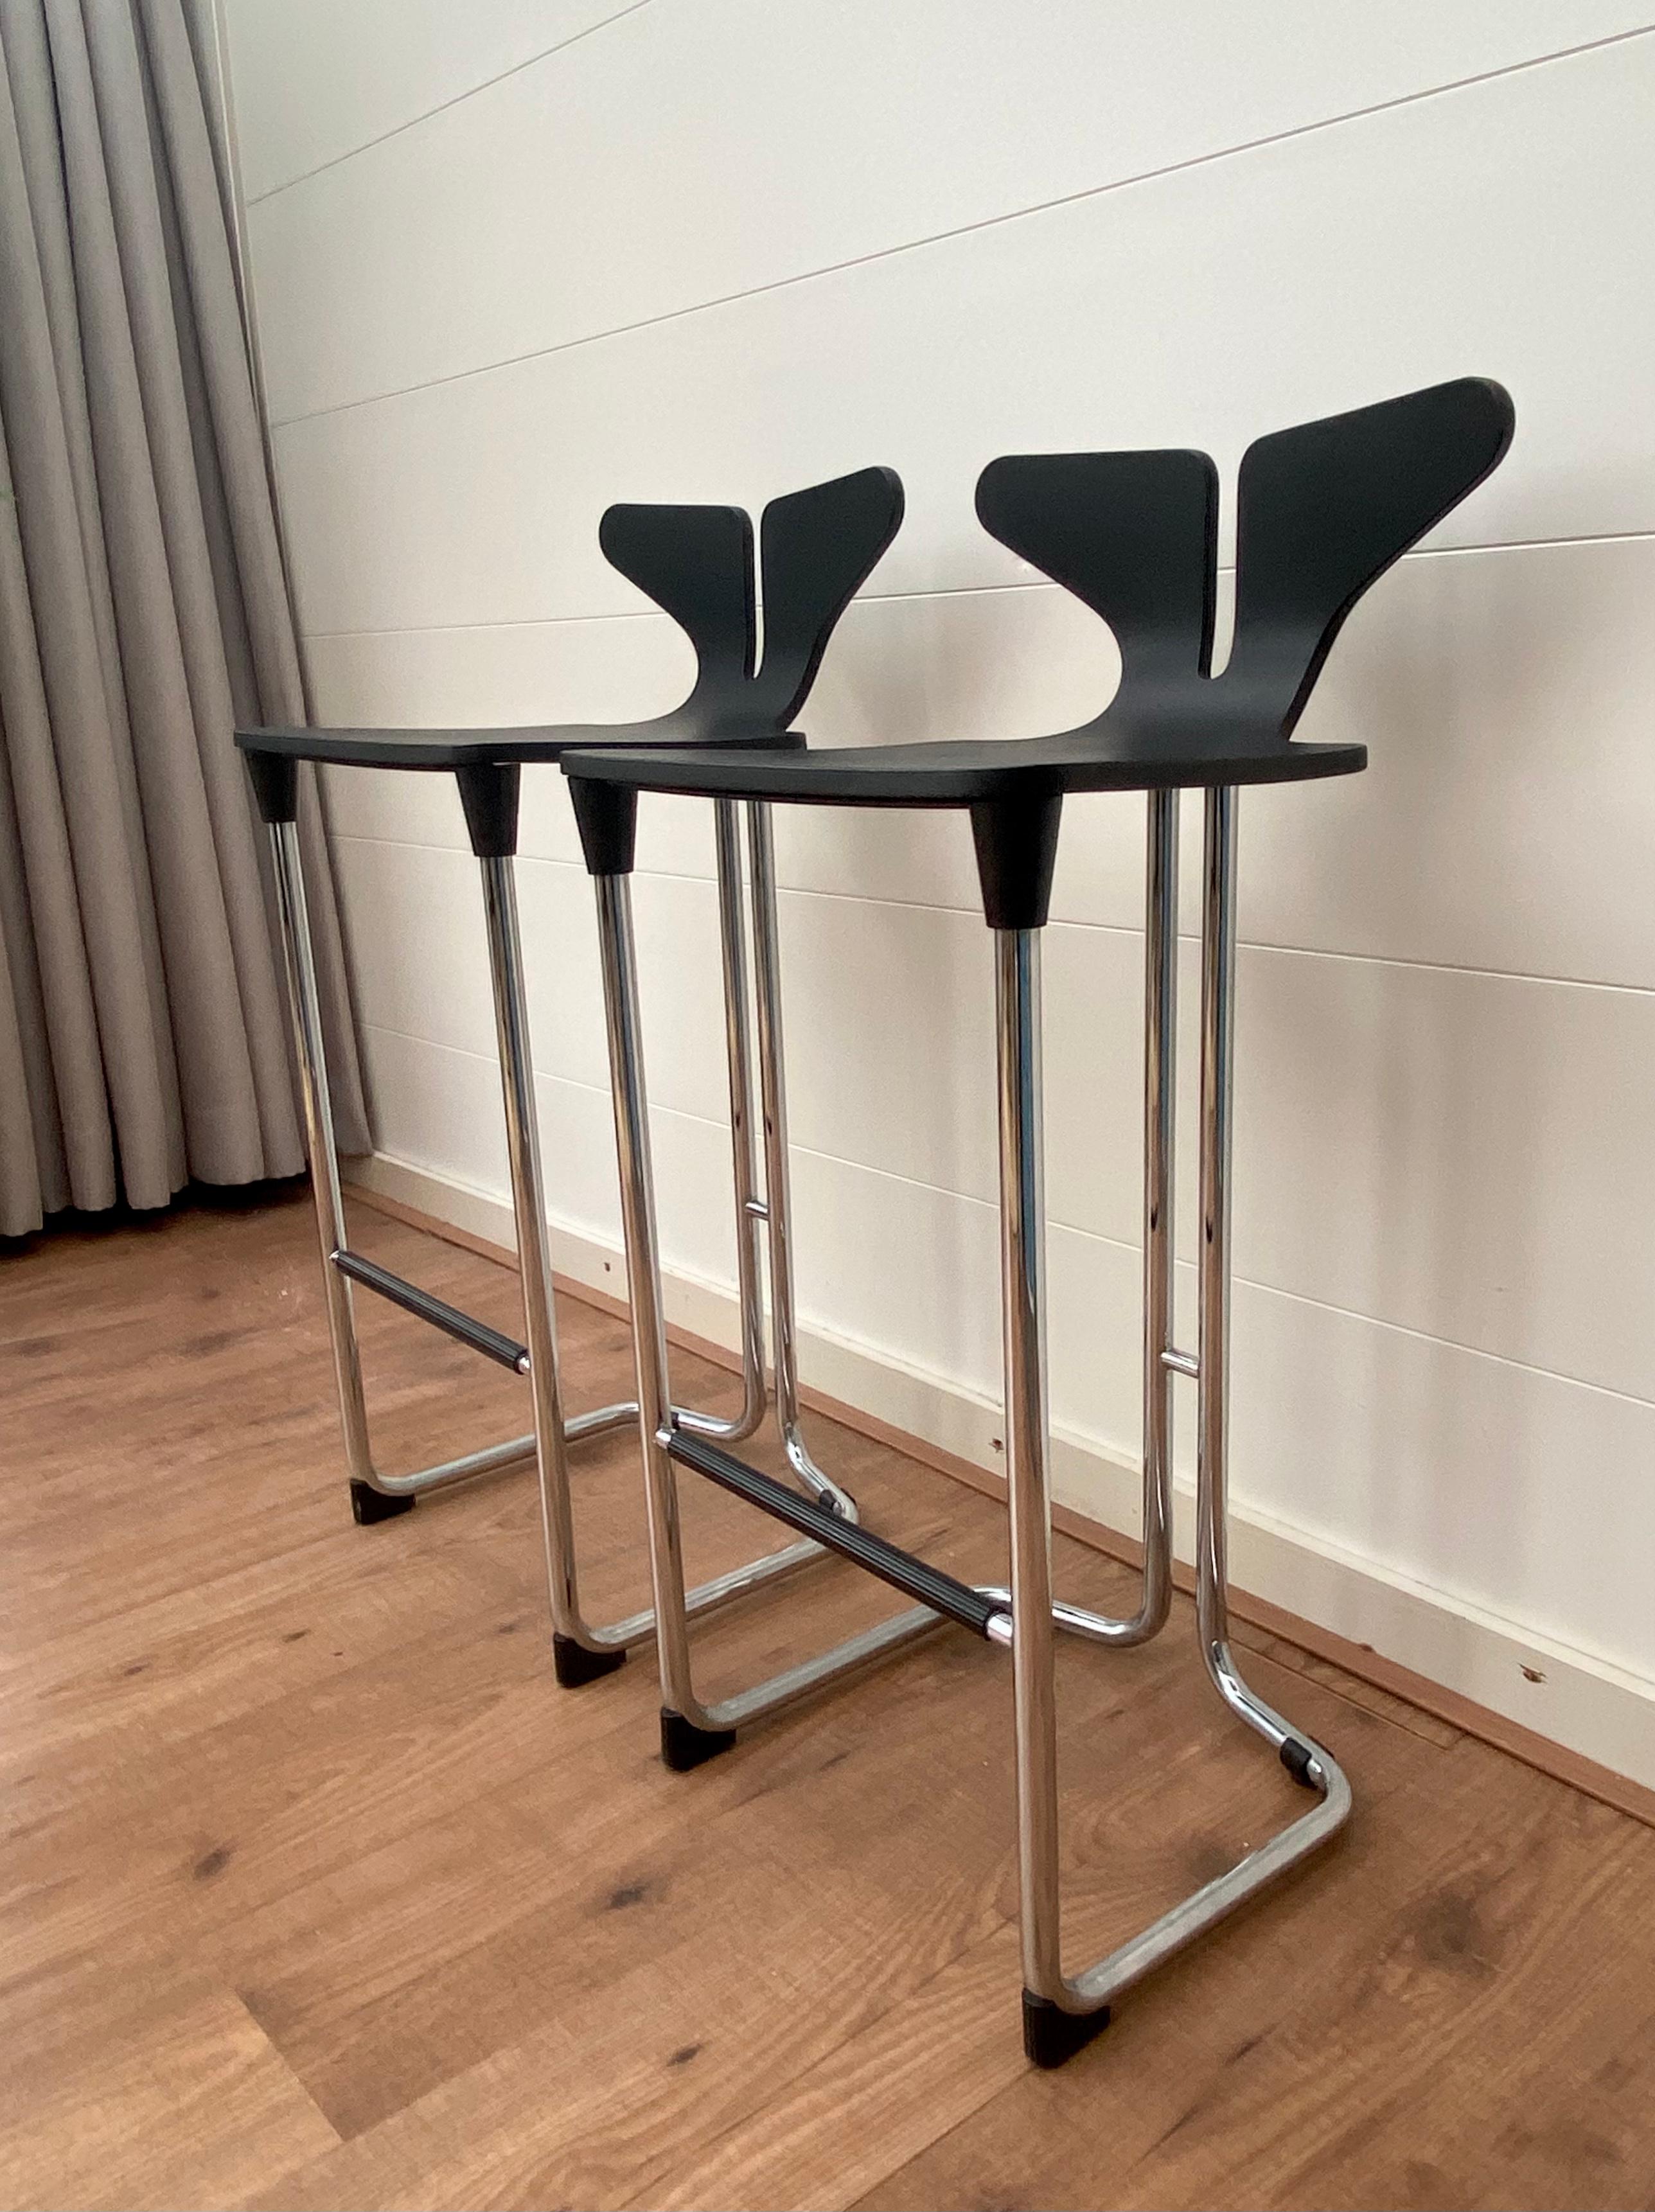 Set of Two Black and Chromed Modern Barstools In Good Condition For Sale In Schagen, NL